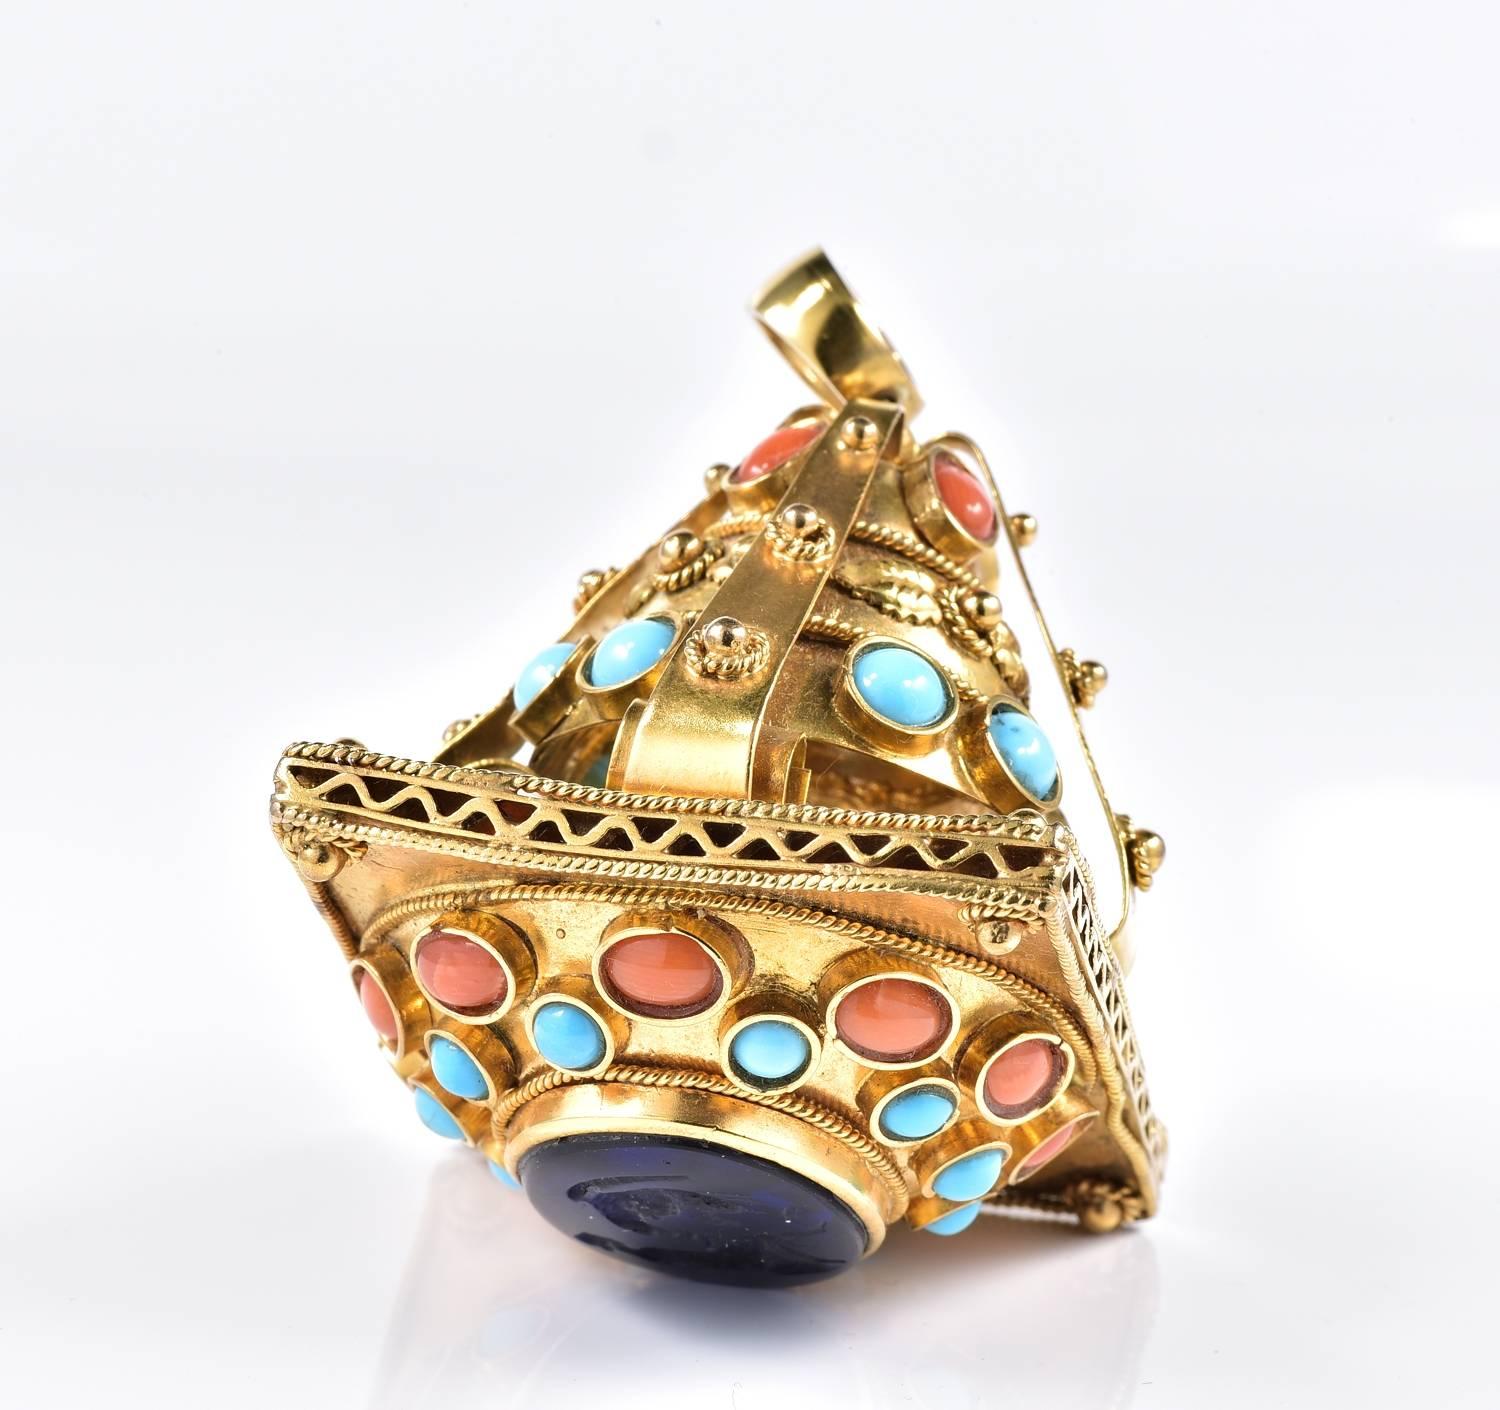 One of a kind Victorian period fob pendant, 1880 ca.
Gigantinc in size not easily seen, boasting magnificent solid 9 KT gold workmanship of the period.
Designed in a revival of the Etruscan style beautifully enriched with coral and turquoise